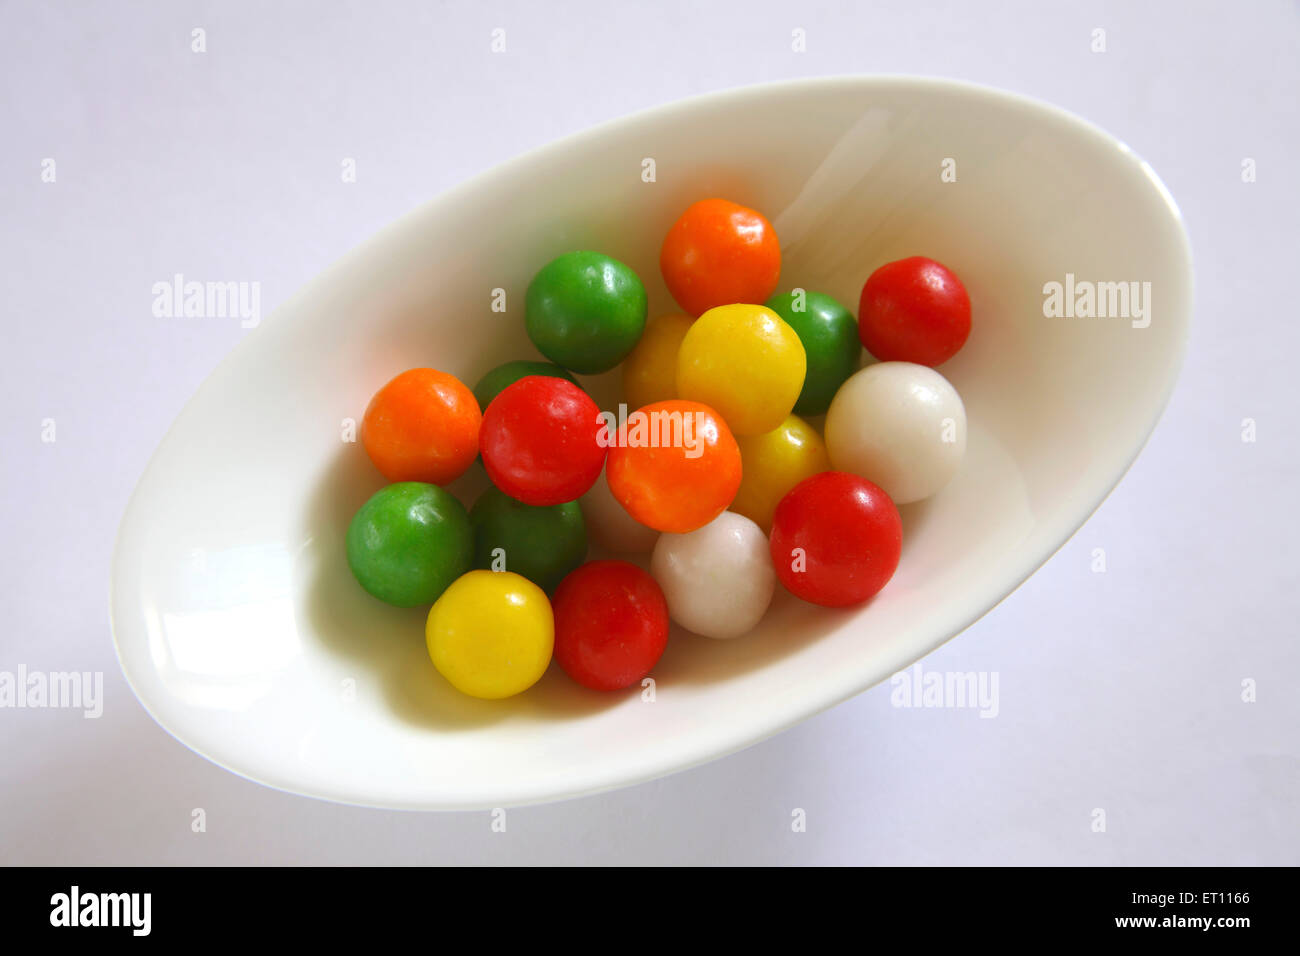 Colourful sweet and sour ball or marble in oval plate on white background Stock Photo